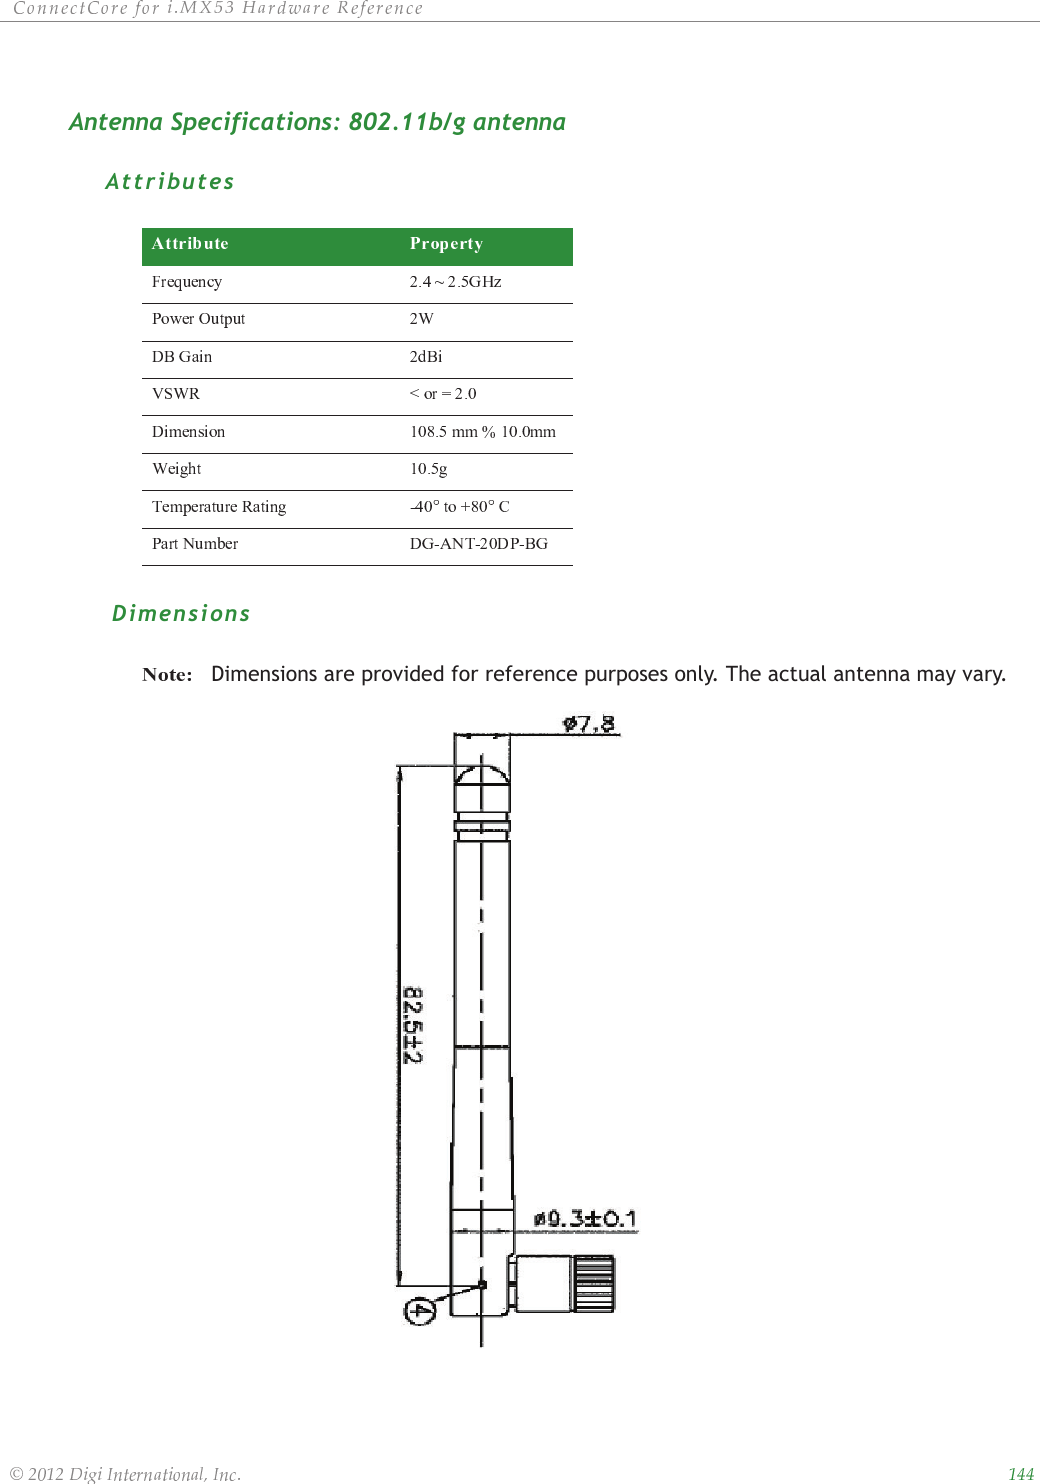 ȱ ȱ ȱ ȱ ȱ ȱȱ ȱ ȱ ȱ ȱȱȱAntenna Specifications: 802.11b/g antennaAttributesDimensions Dimensions are provided for reference purposes only. The actual antenna may vary.